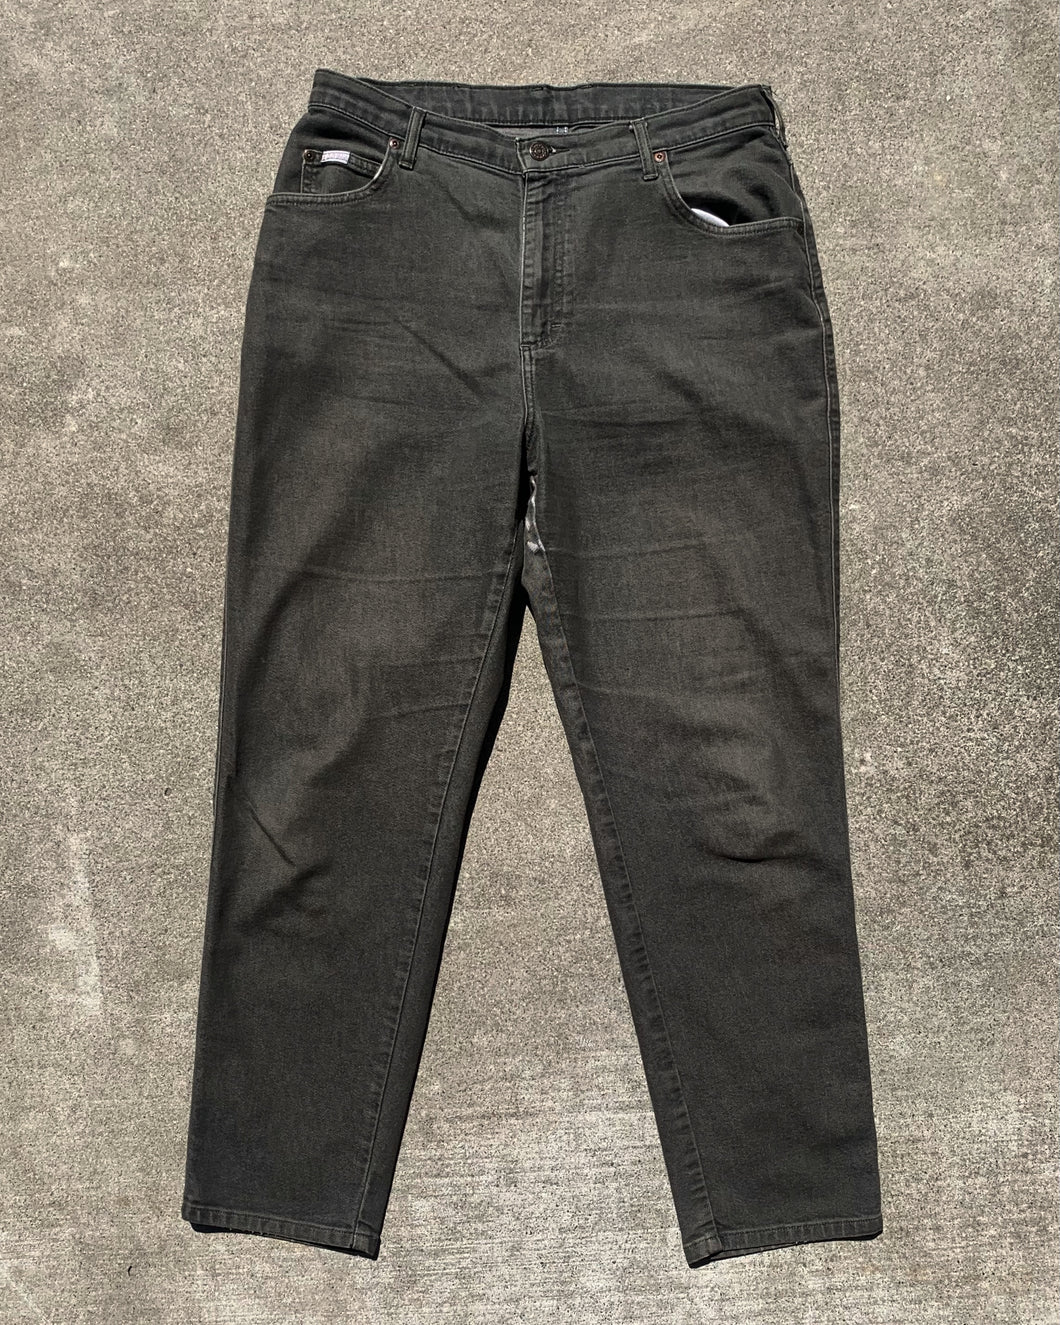 Lee Green Soft Cotton Jeans